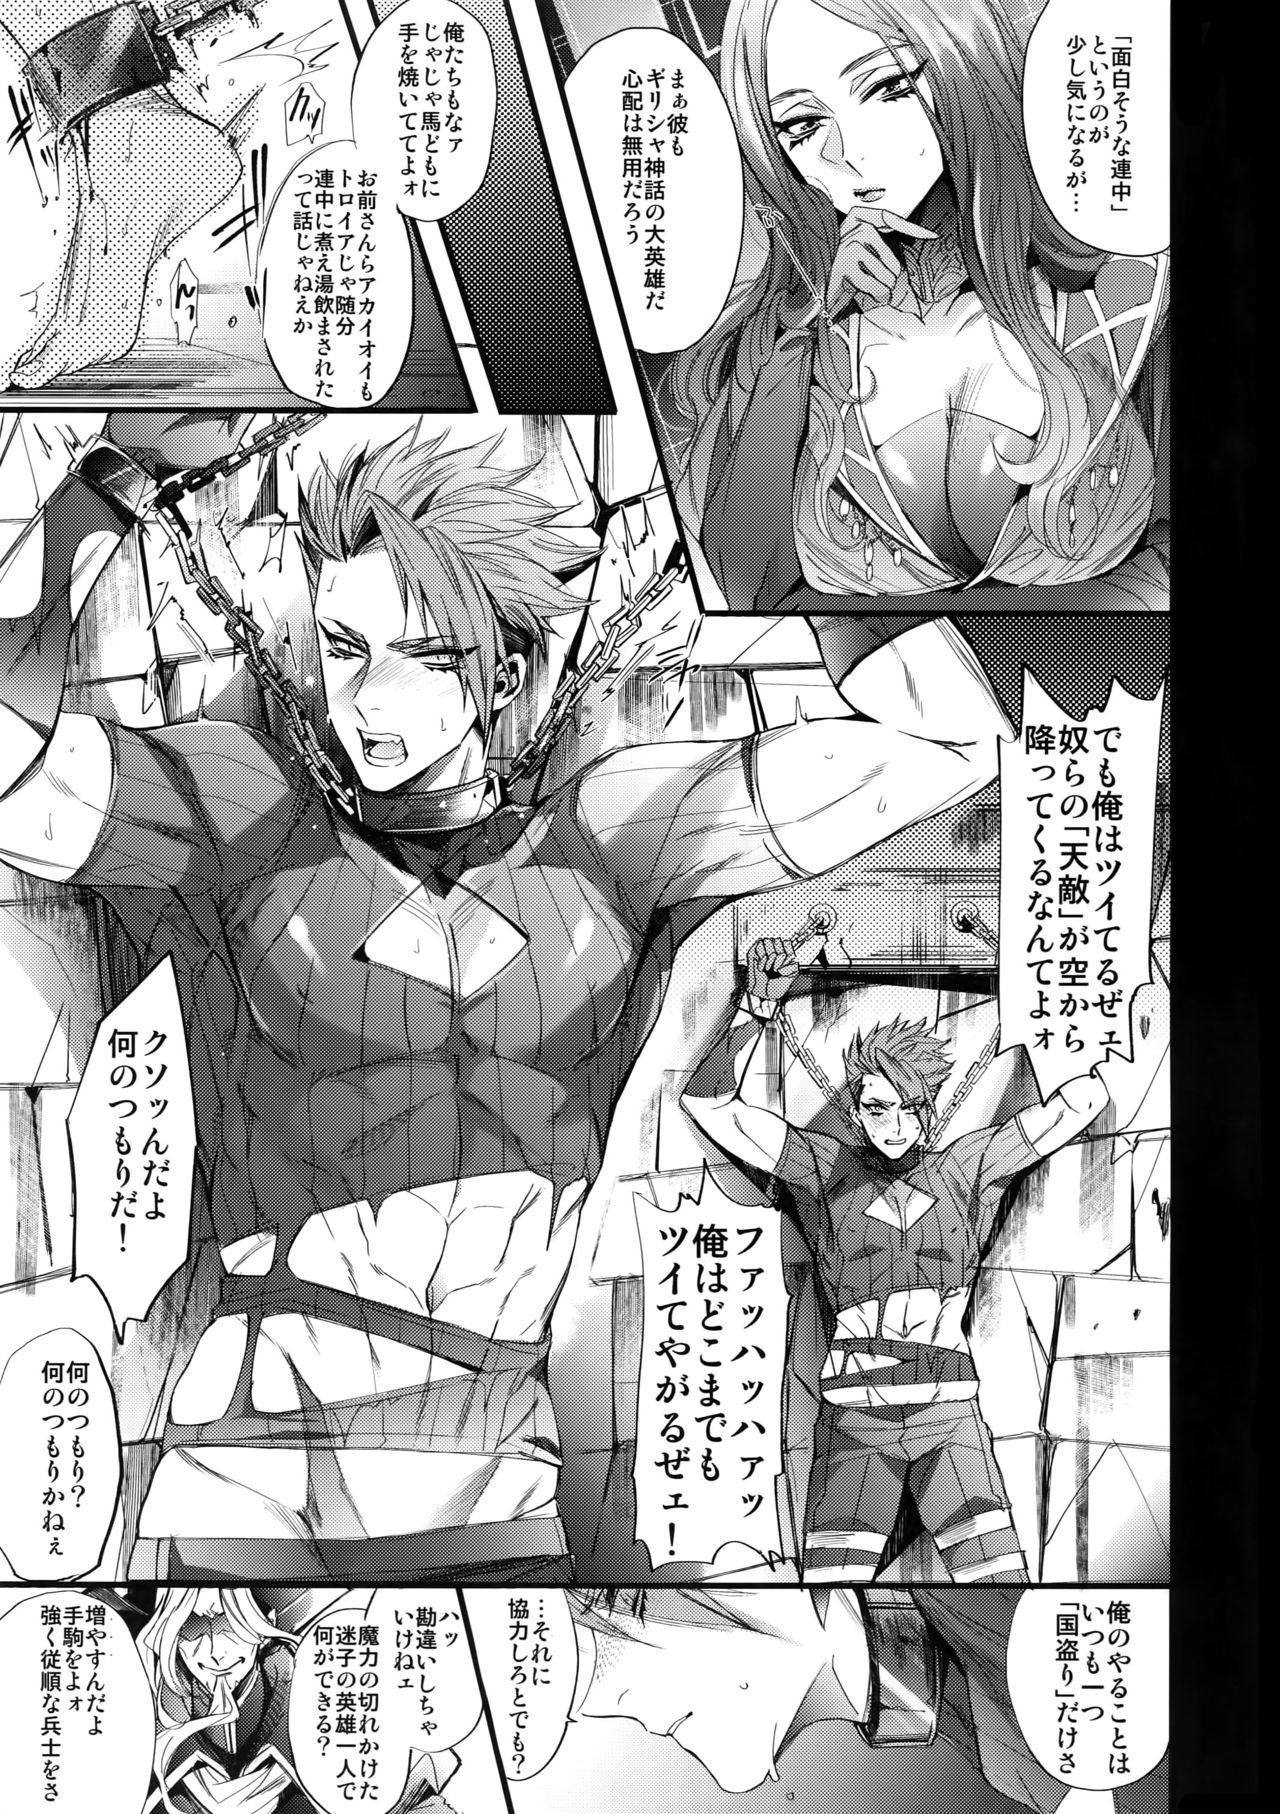 Hunk From Dusk Till The End - Fate grand order Celeb - Page 4